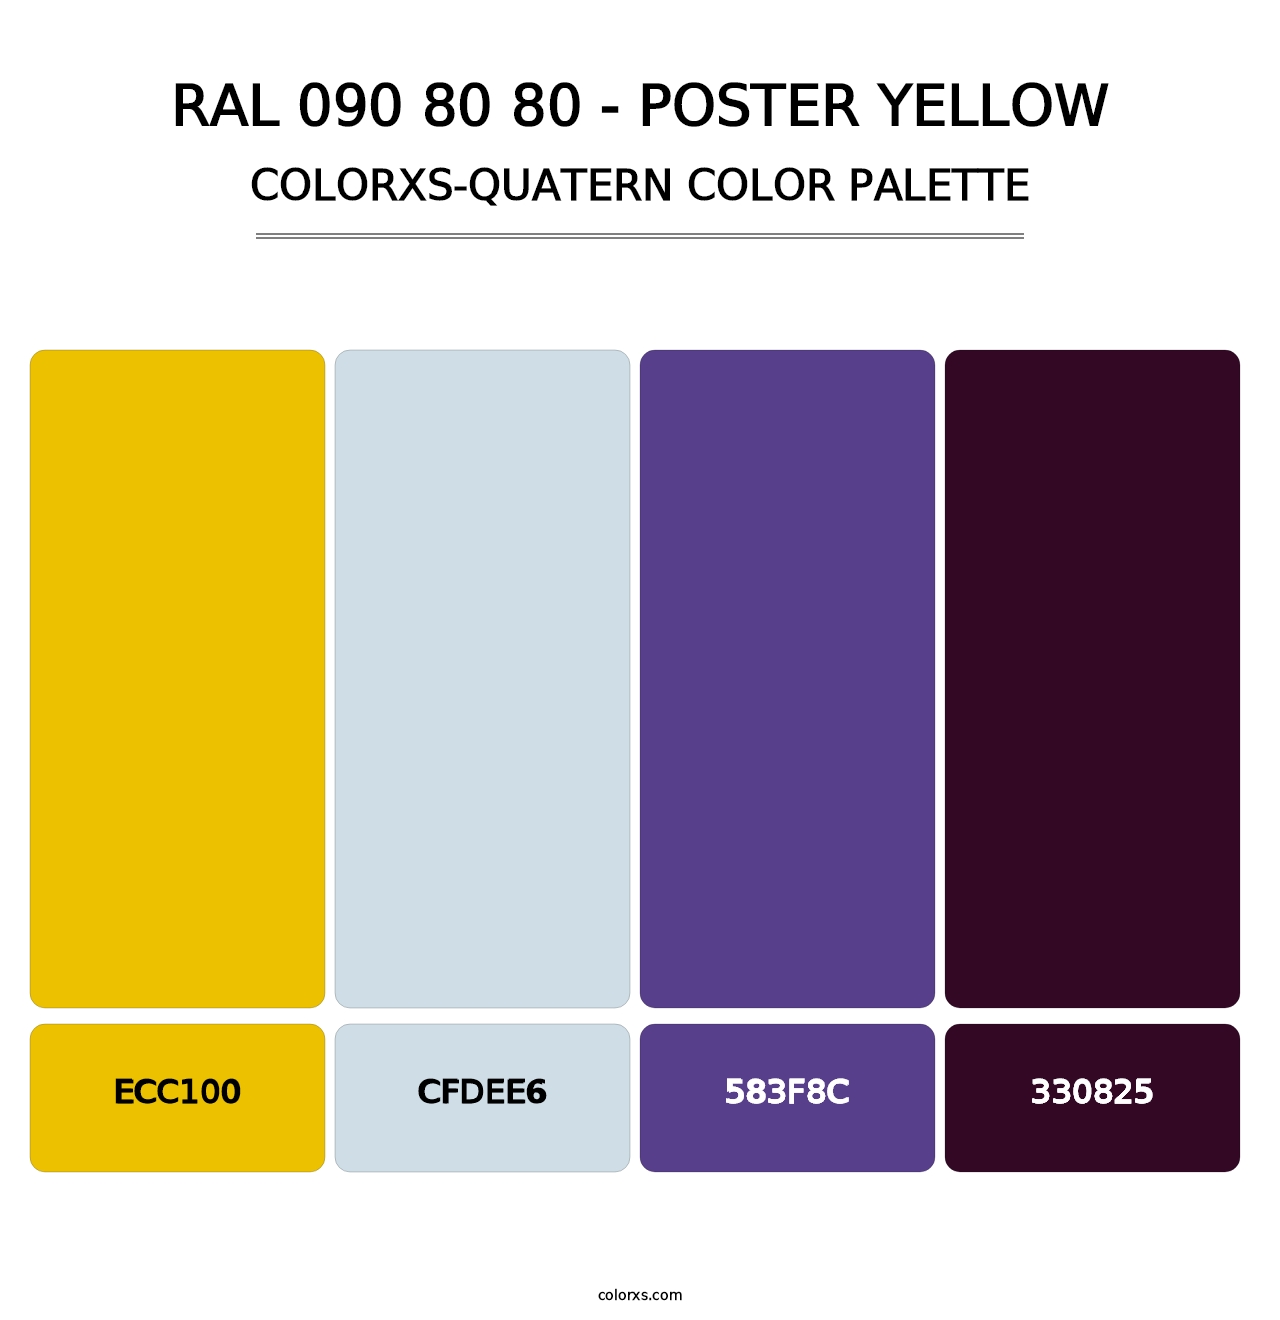 RAL 090 80 80 - Poster Yellow - Colorxs Quatern Palette